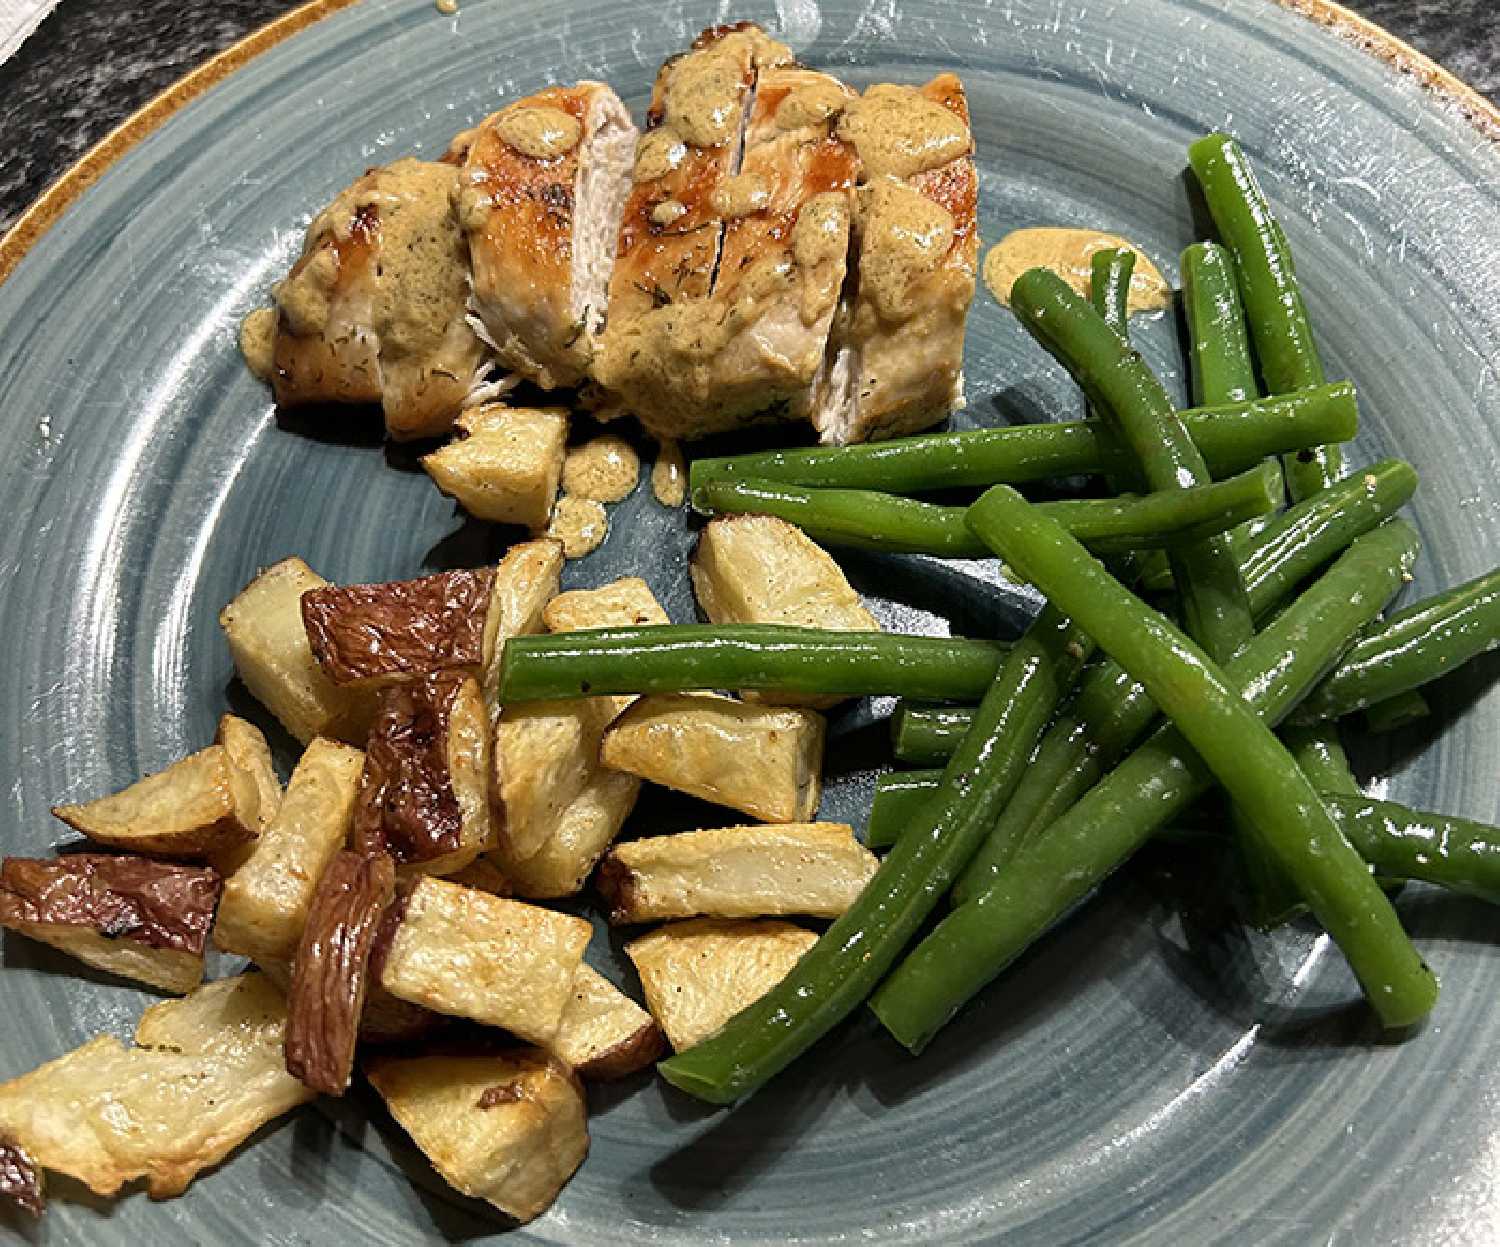 An example of a meal that was prepared with a meal kit.